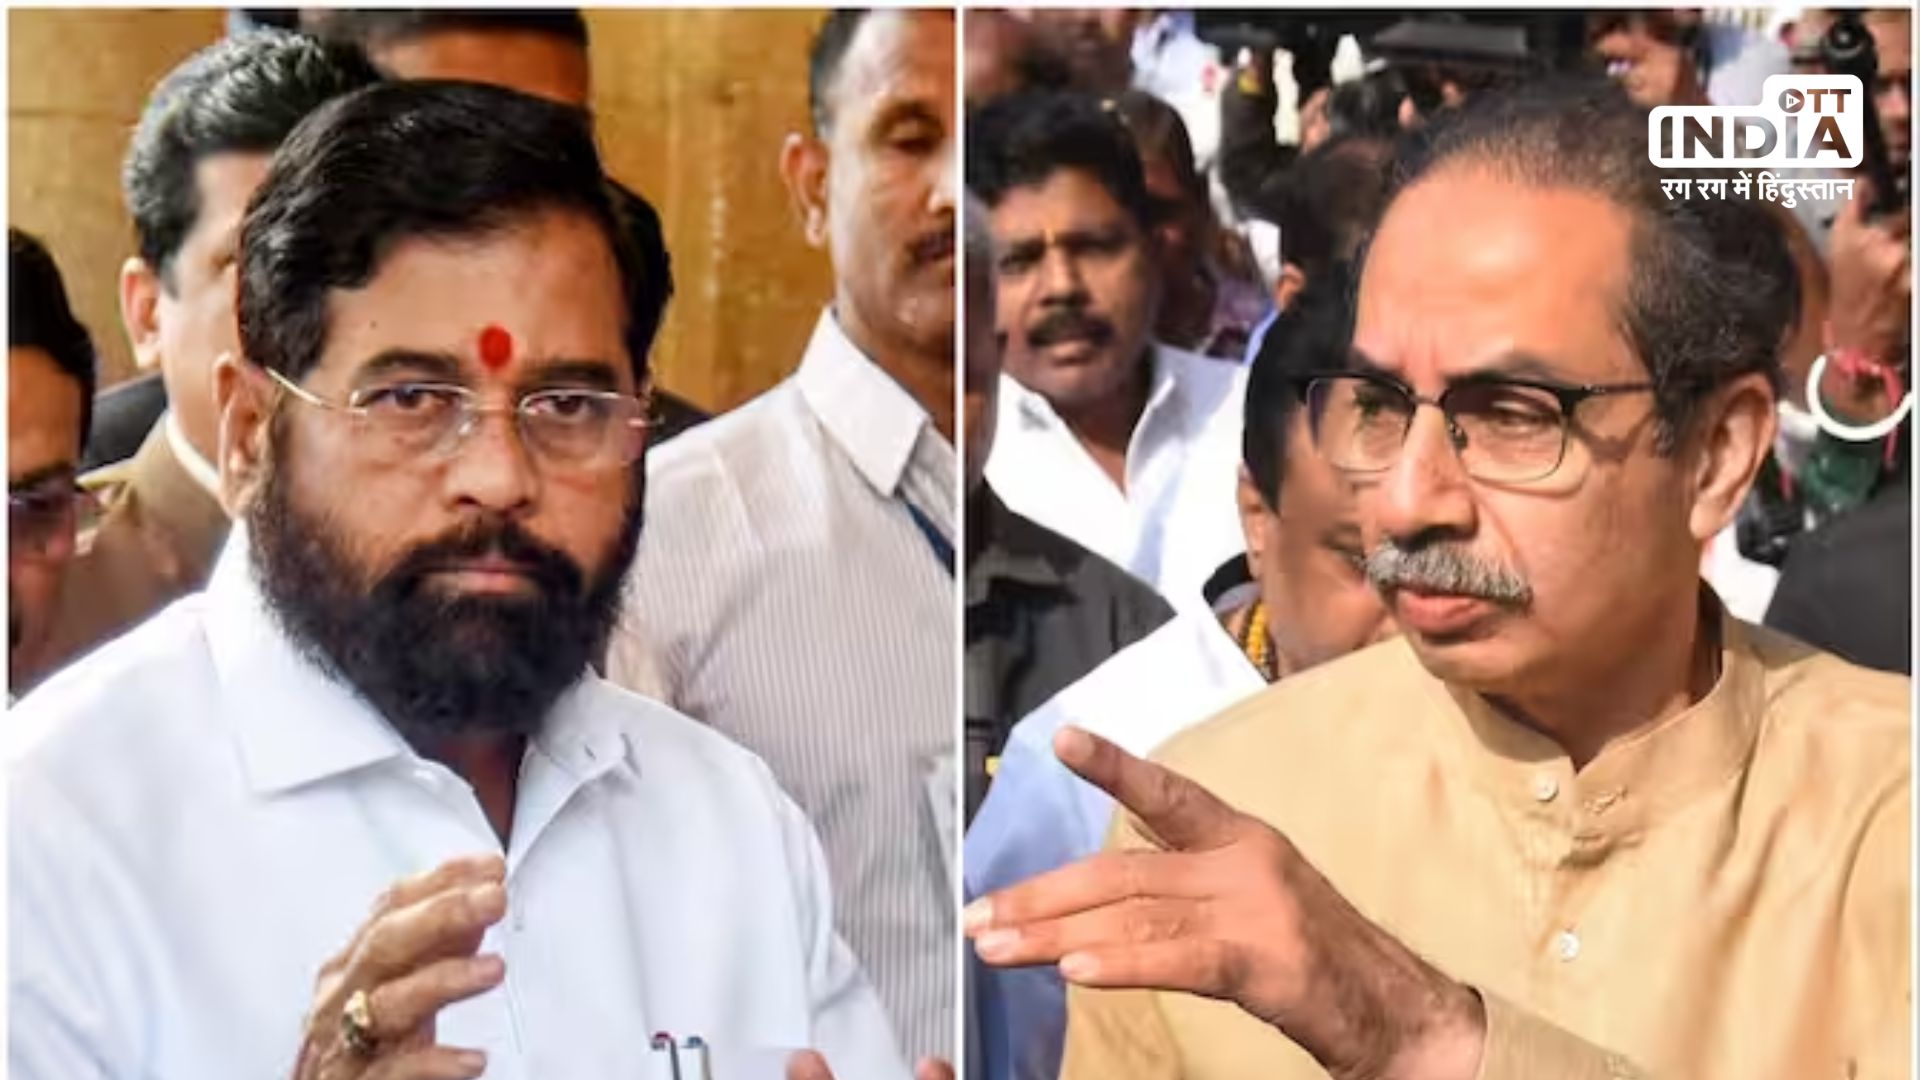 Speaker rejected demand of Uddhav Thakre group and said no right to remove Eknath Shinde from Maharastra Government